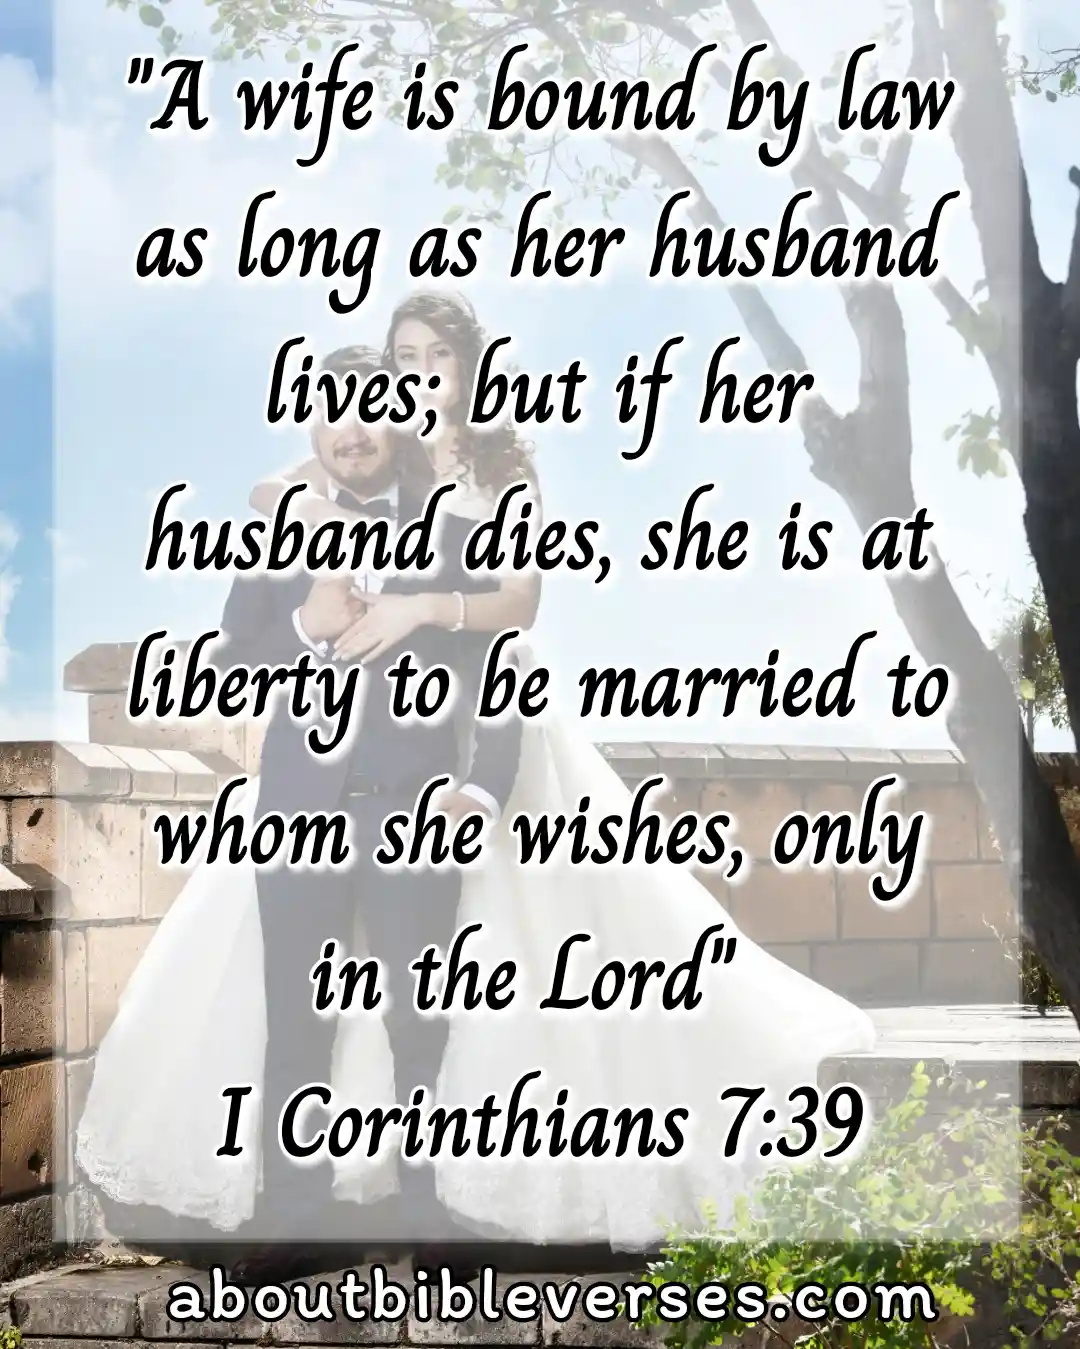 Bible Verses About Divorce And Remarriage (1 Corinthians 7:39)